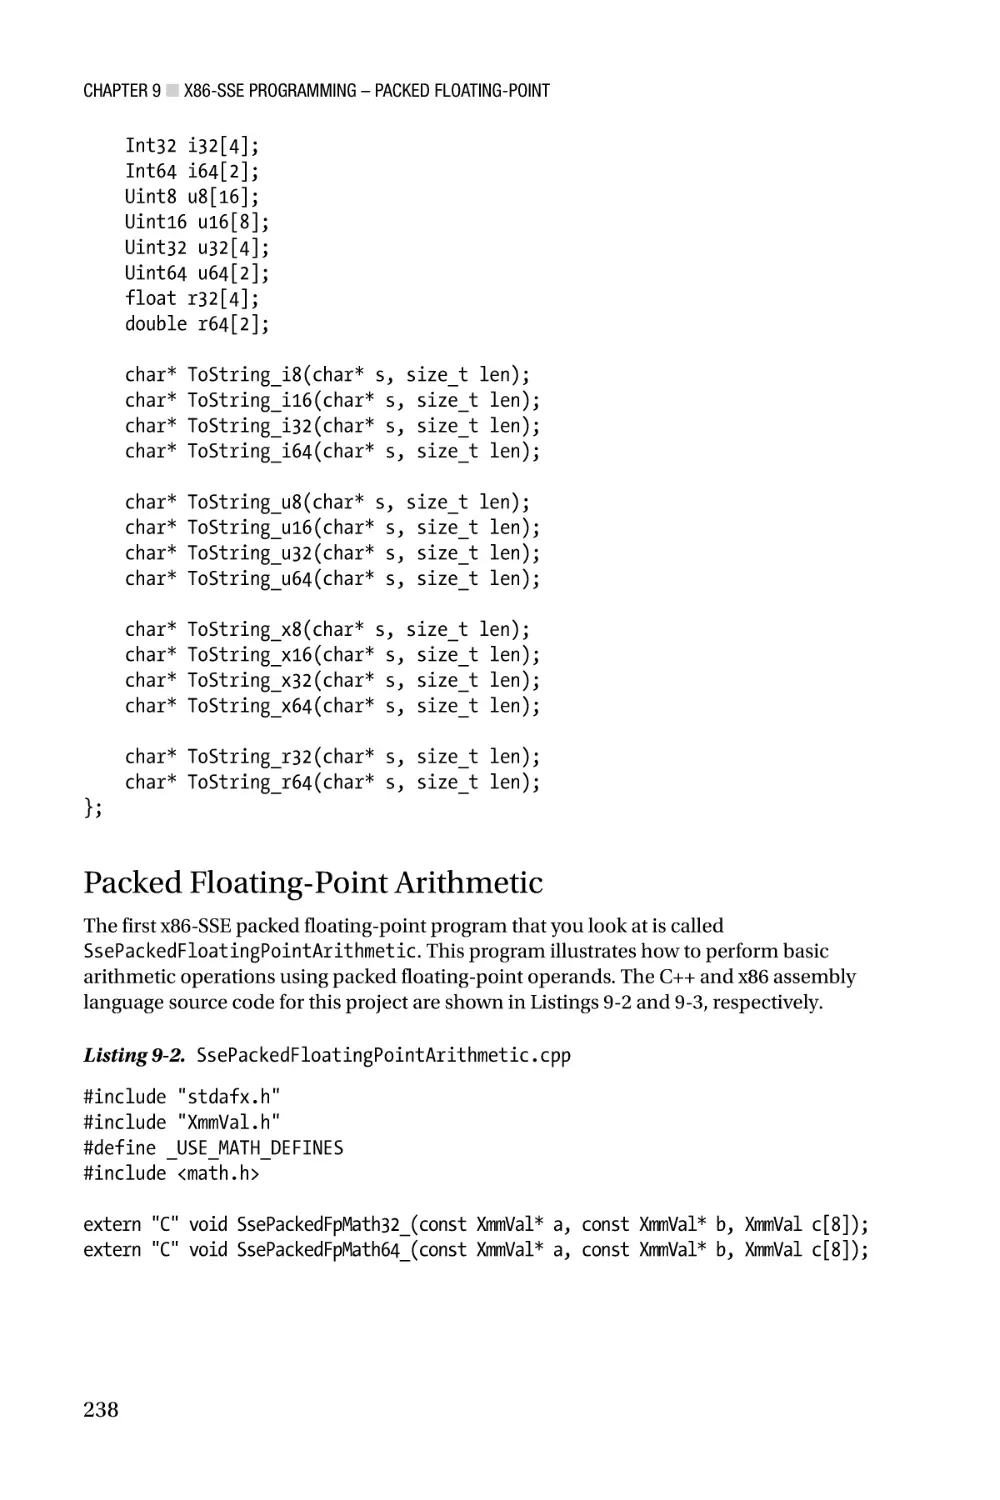 Packed Floating-Point Arithmetic